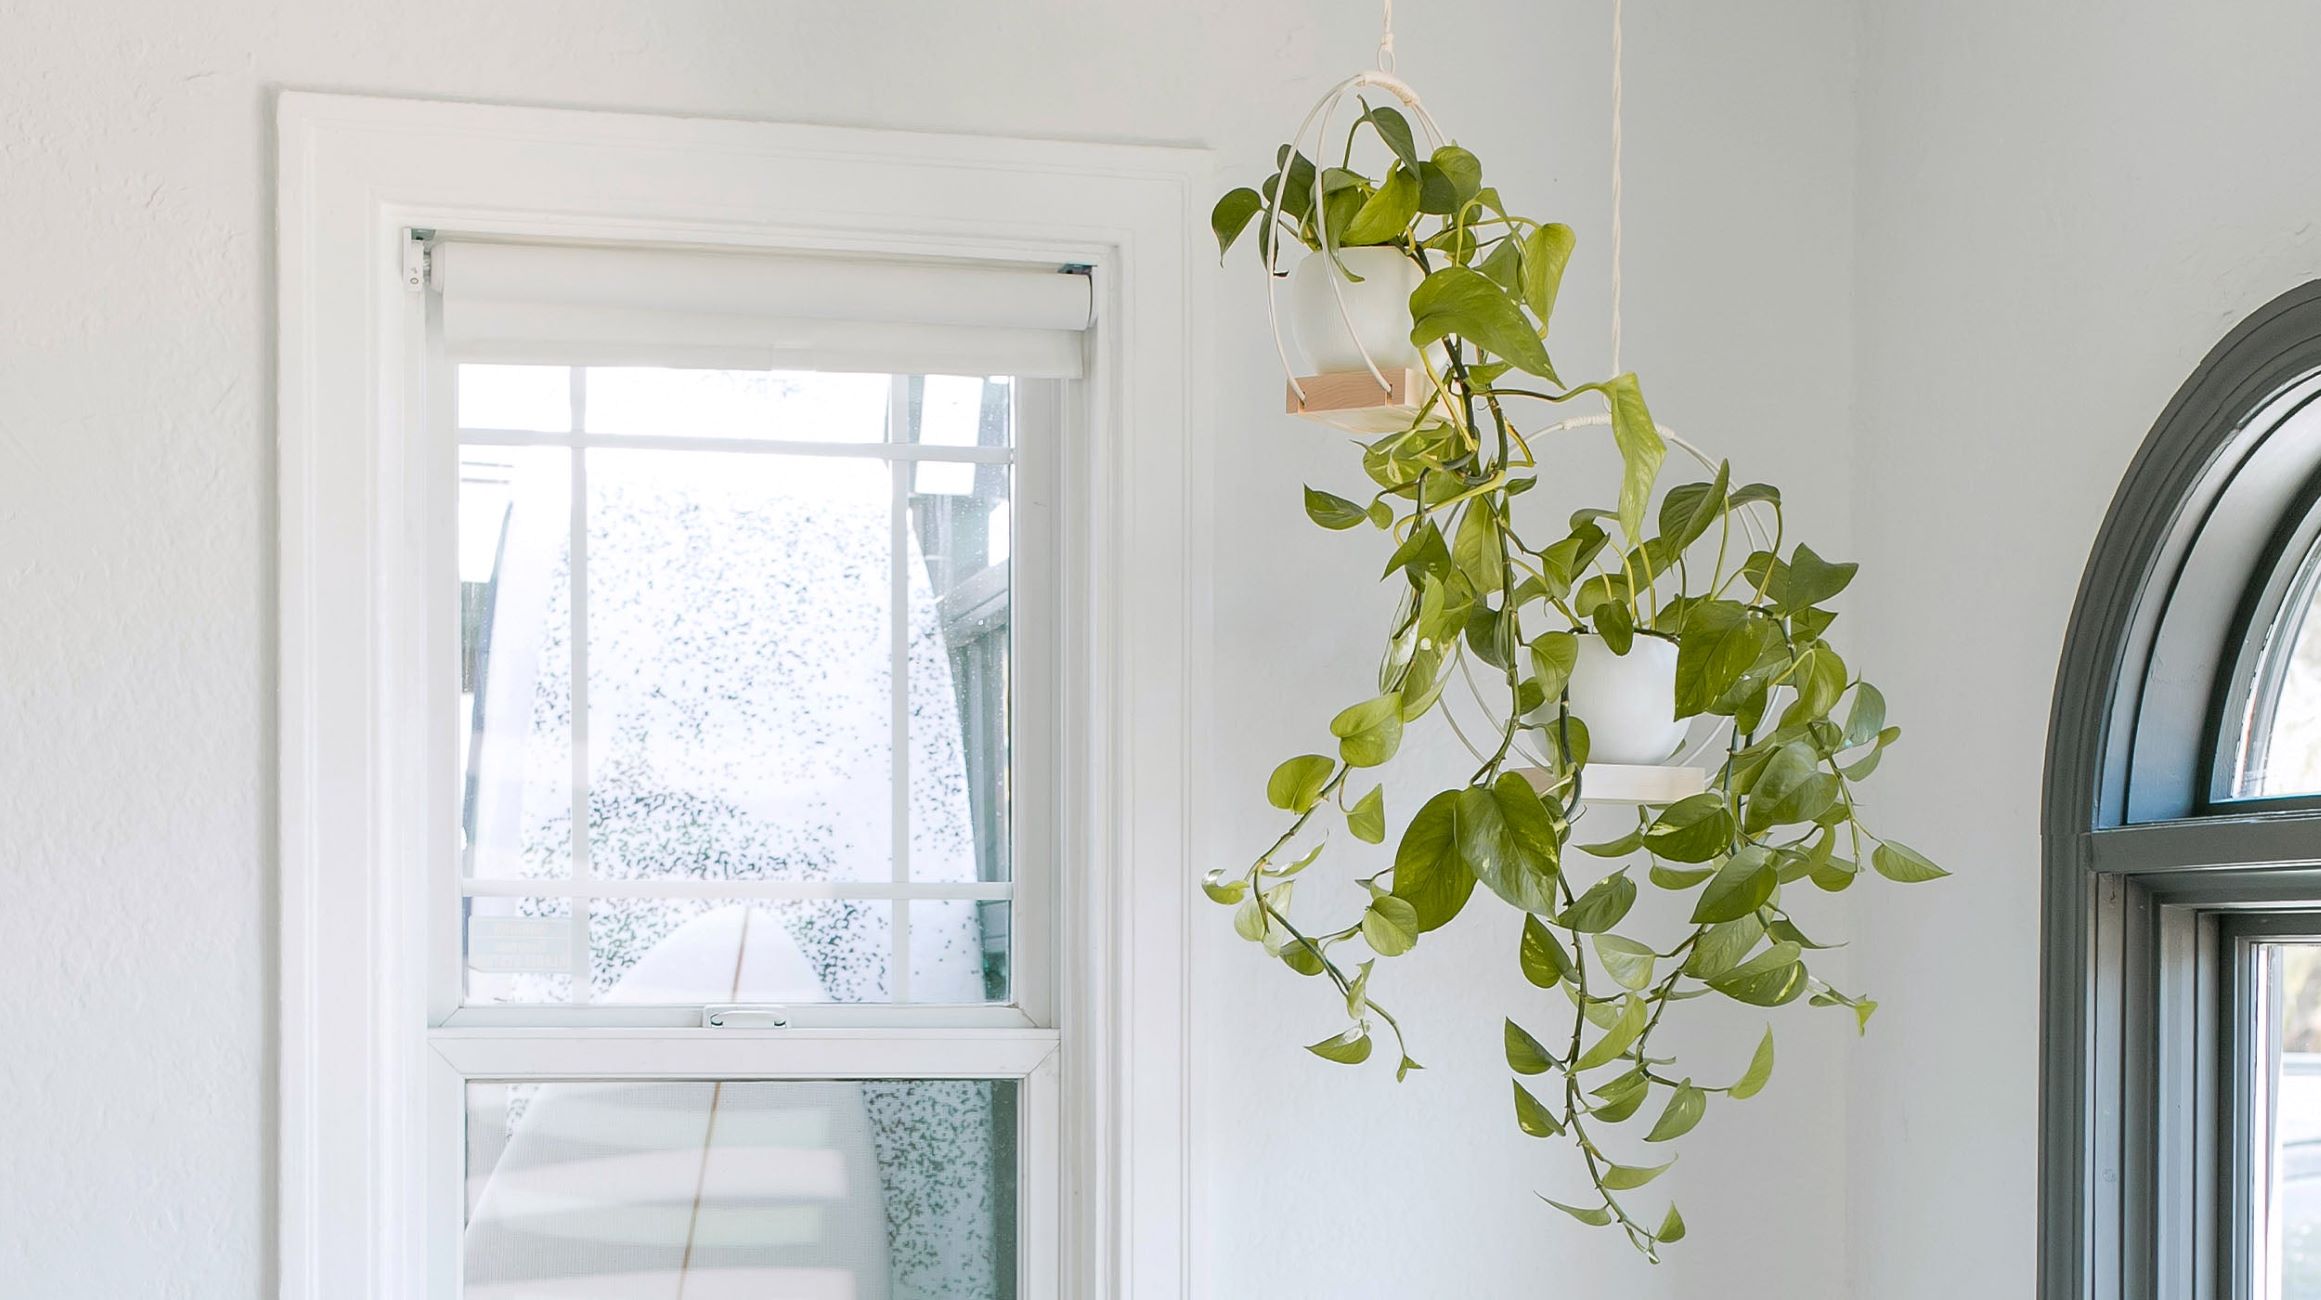 How To Ensure Good Drainage In Indoor Hanging Plants